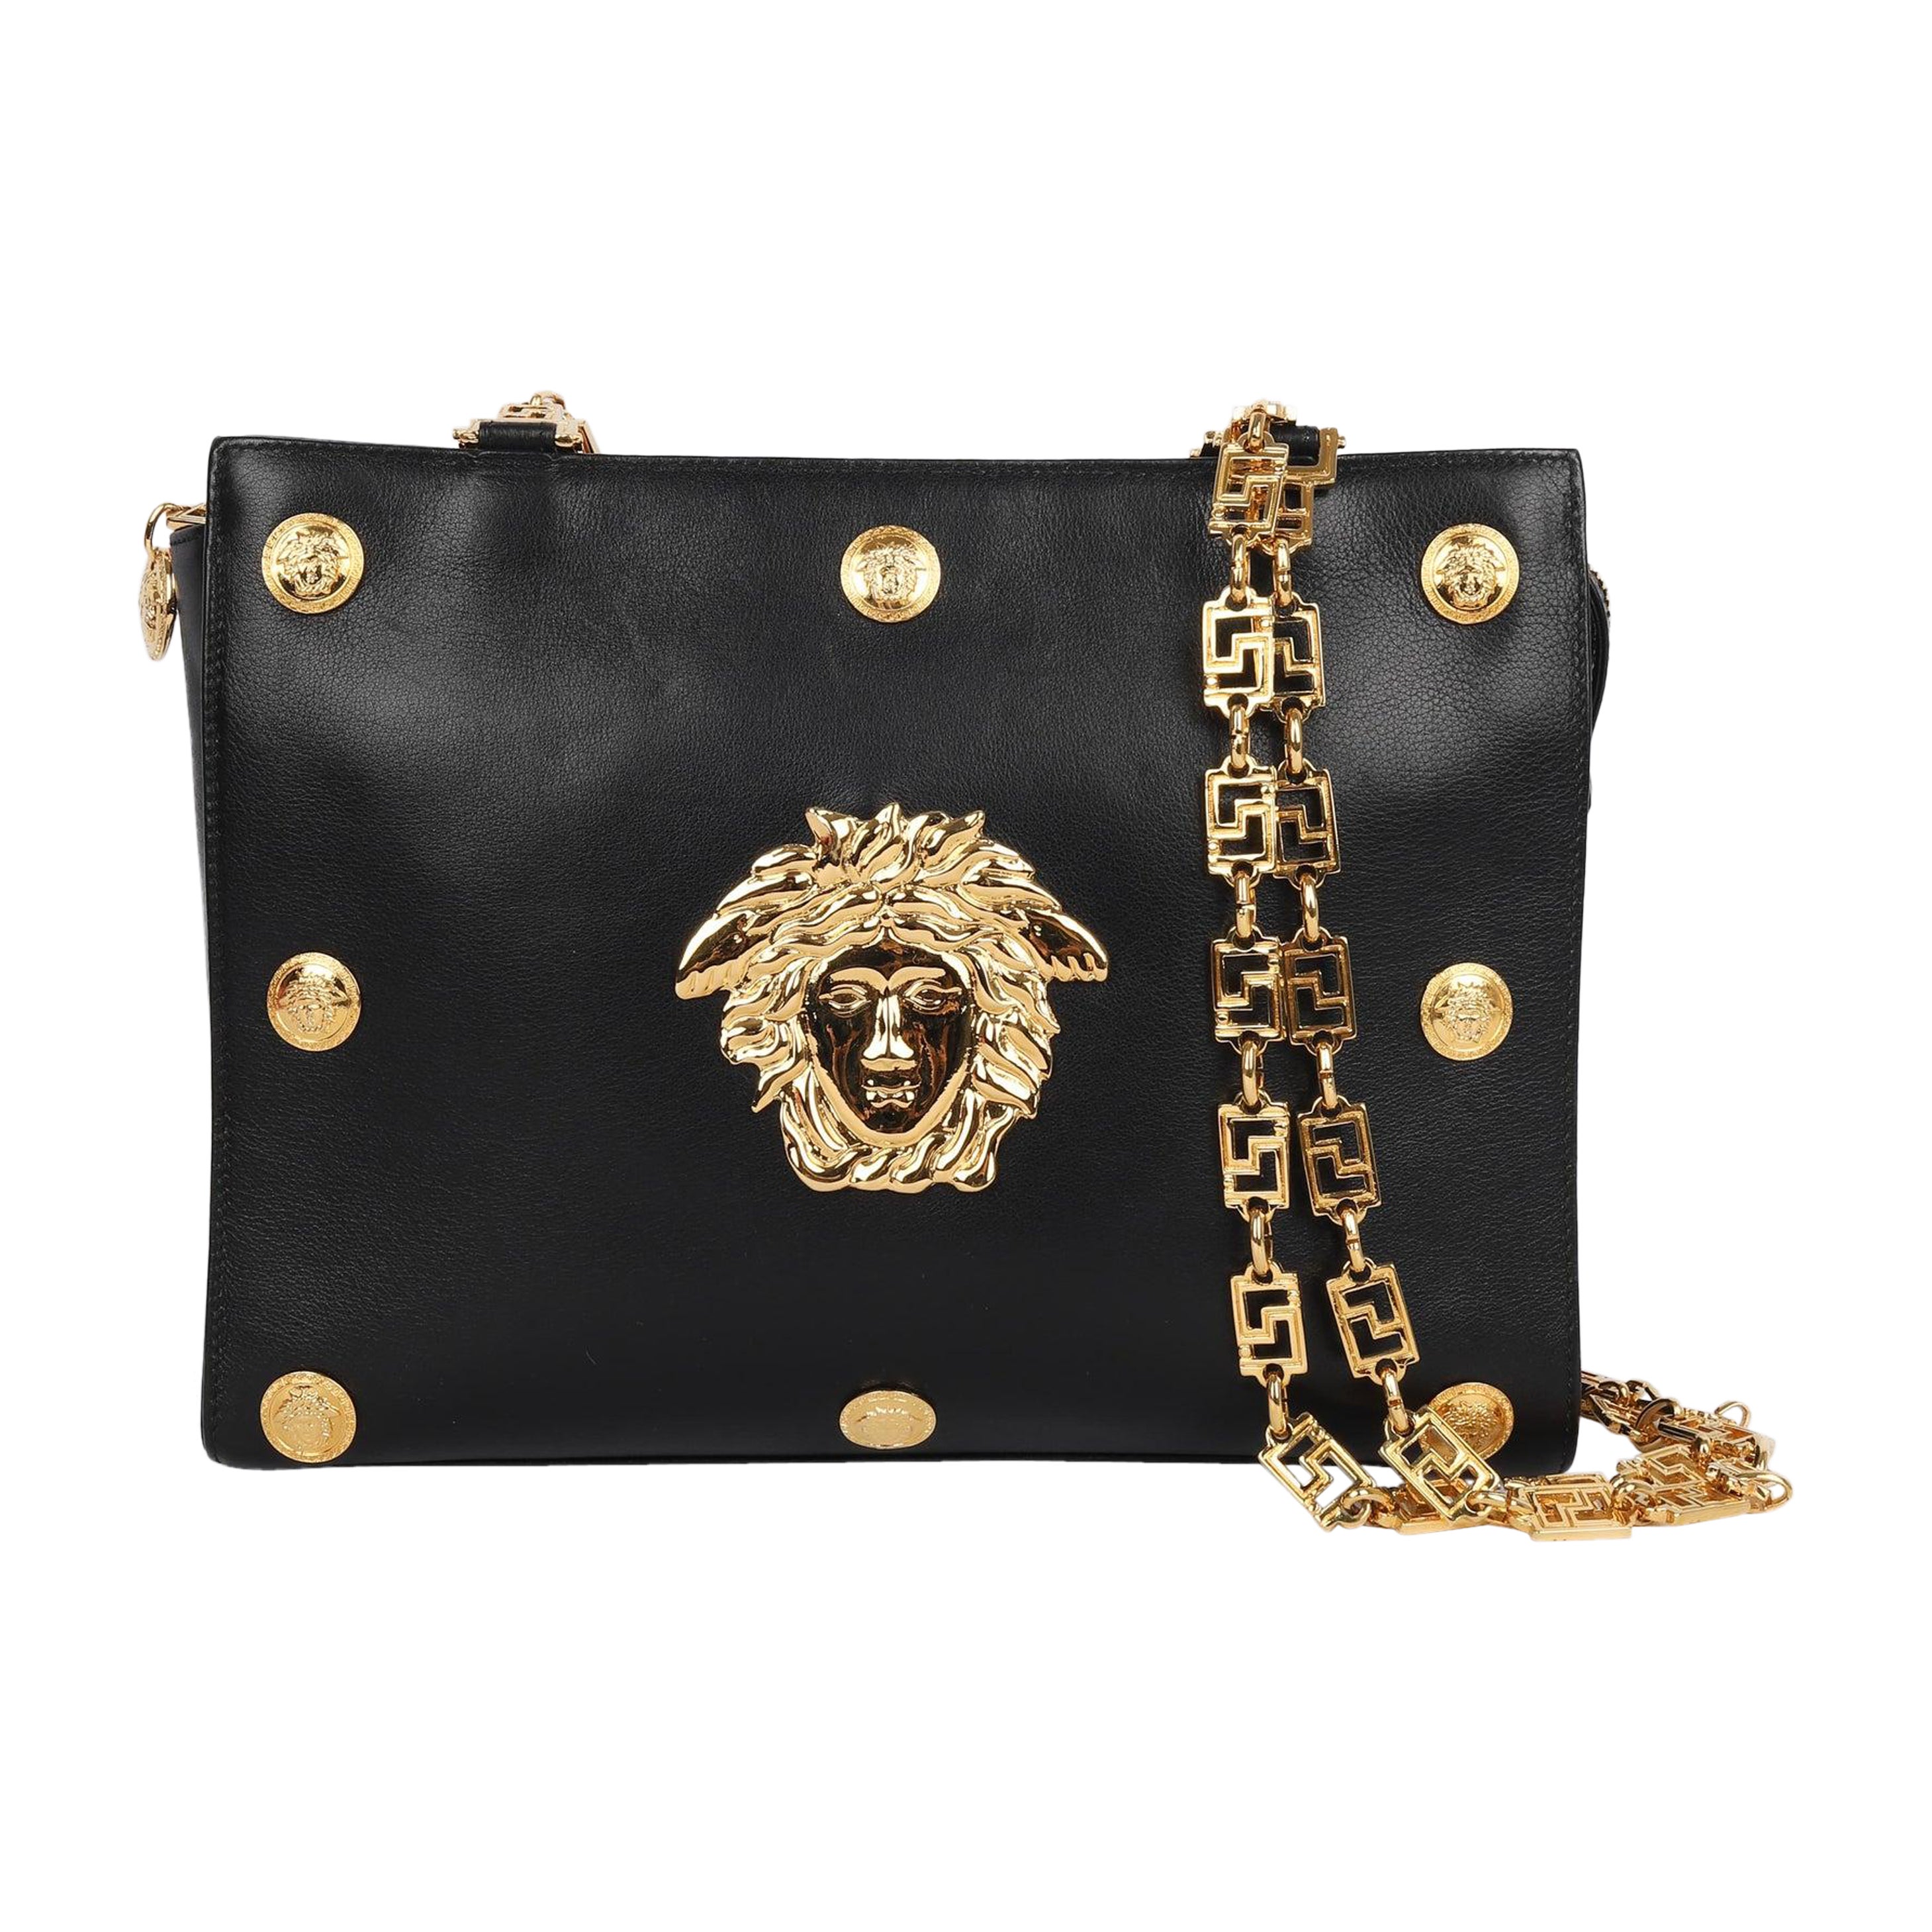 Gianni Versace Black Leather Bag with Golden Metal Elements